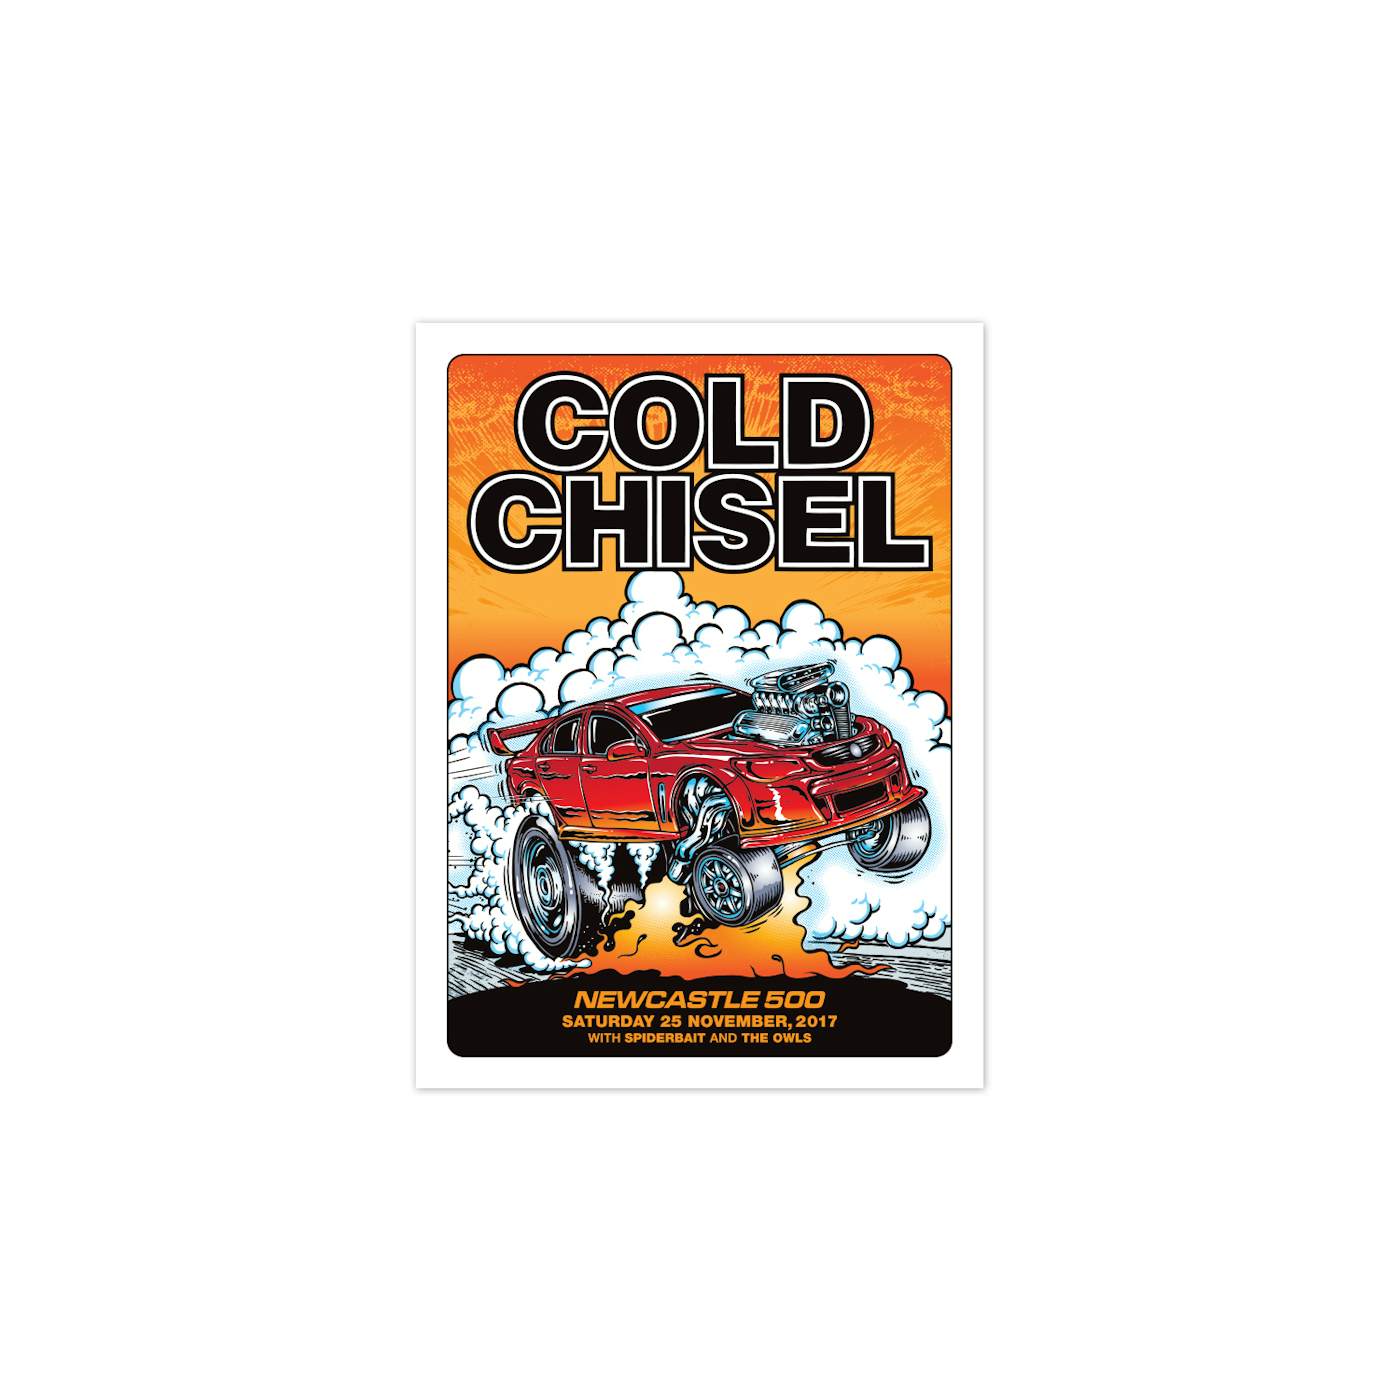 Cold Chisel Newcastle 500 Event Lithograph Poster (25th November 2017)